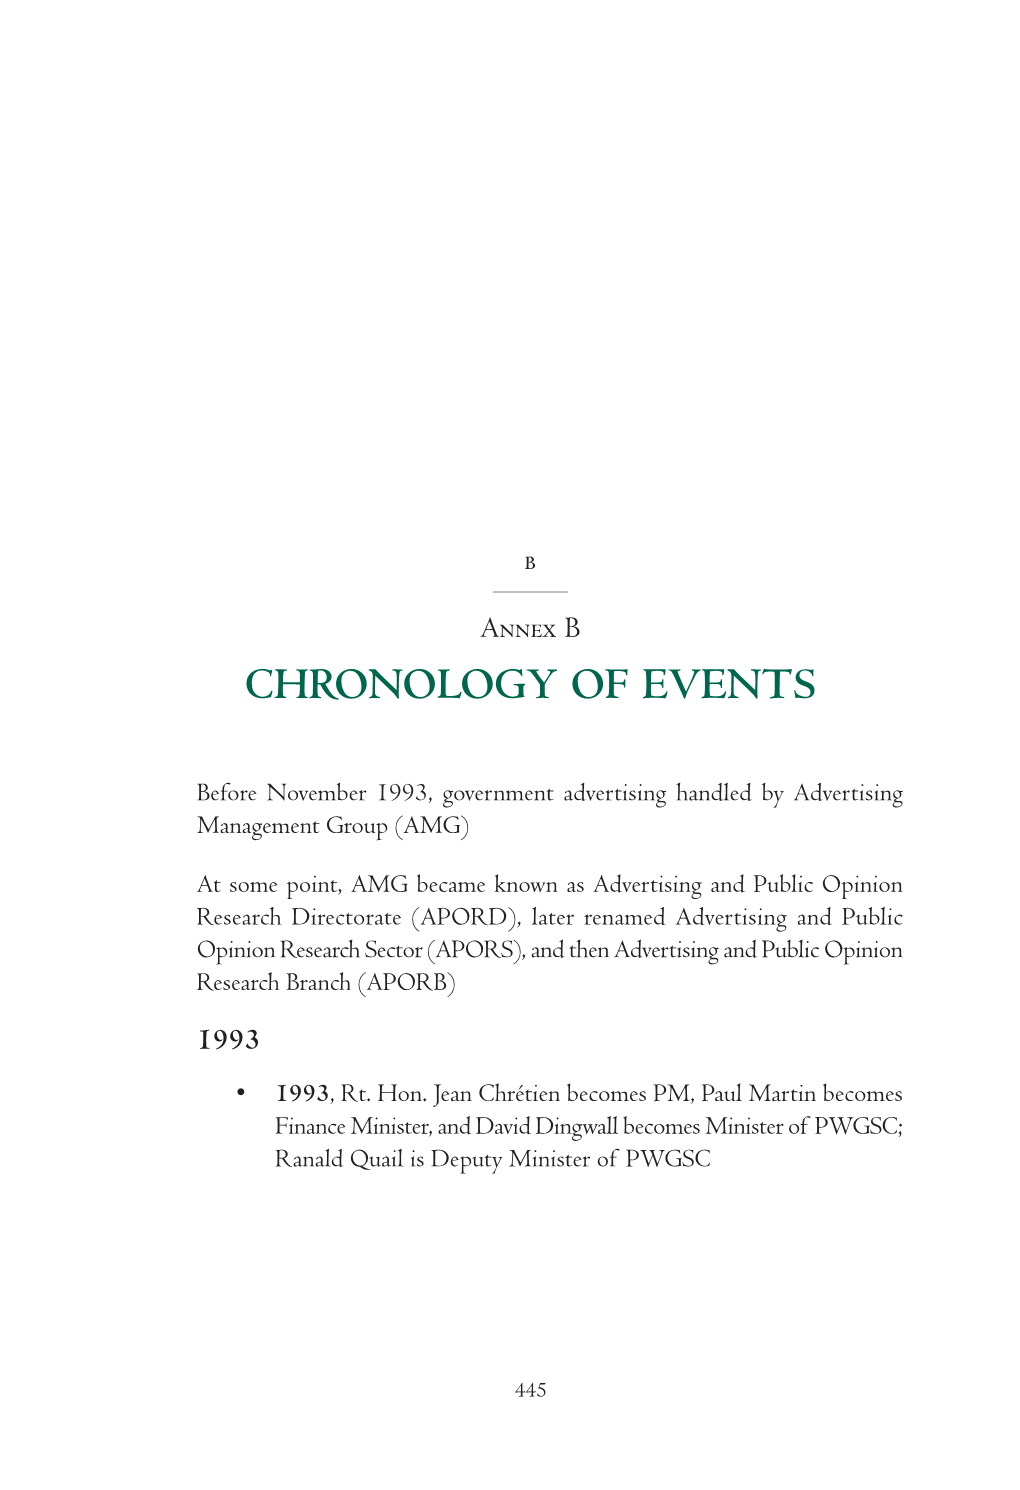 Annex B CHRONOLOGY of EVENTS